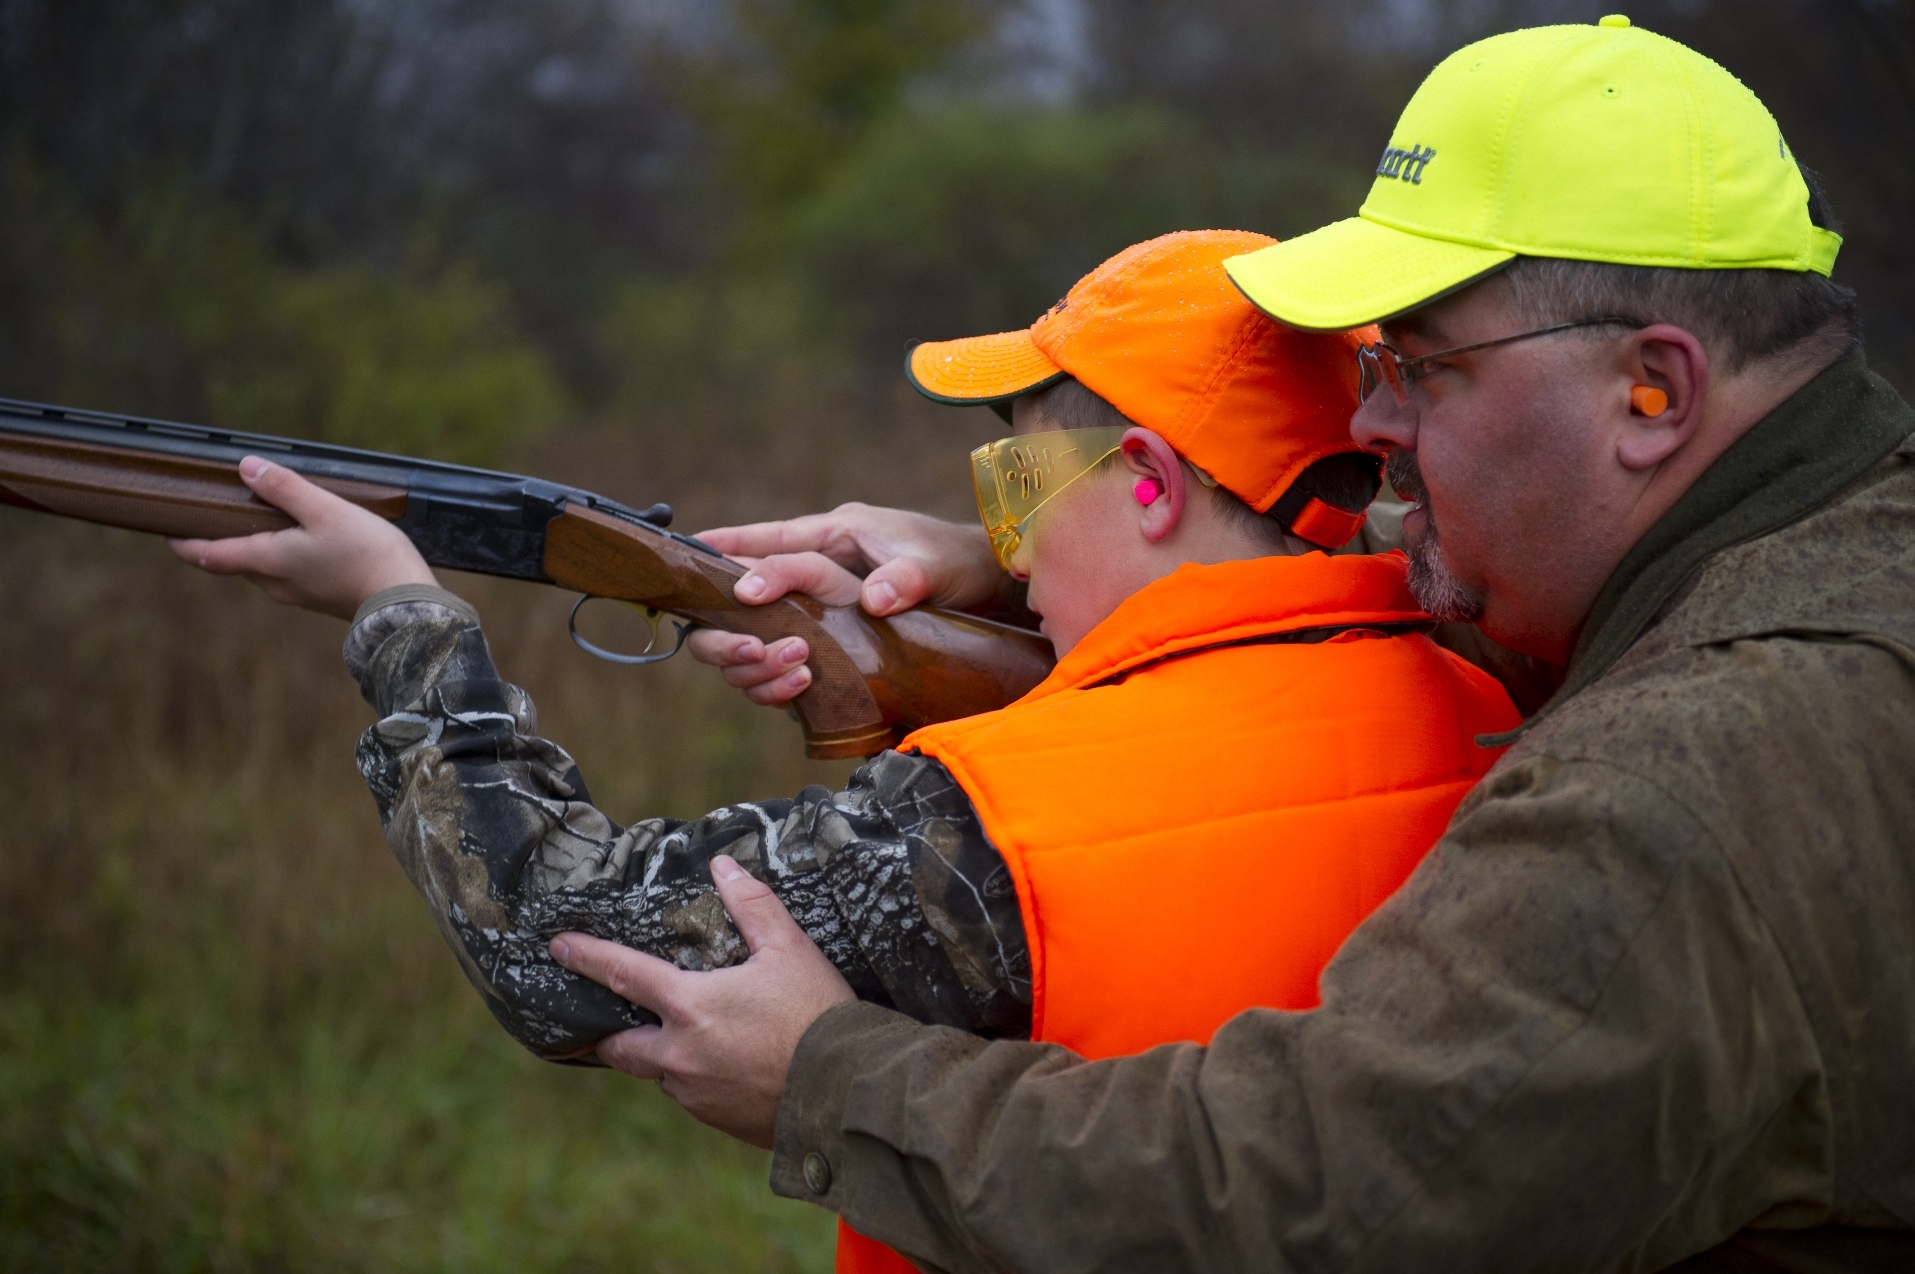 Volunteers drive Michigan’s hunter education program, with about 20,000 students instructed each year.